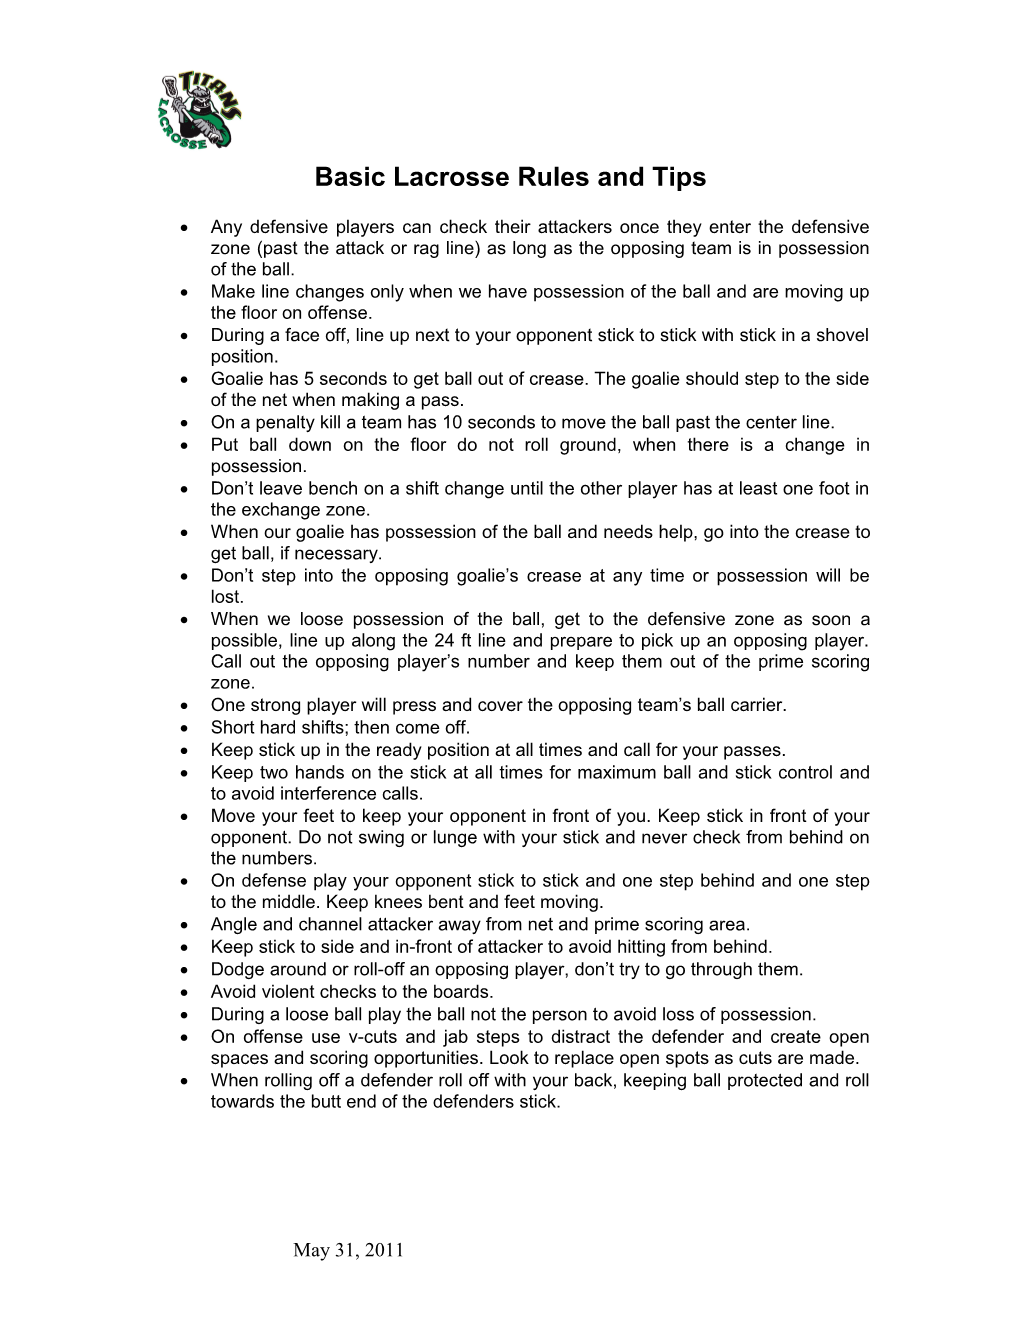 Basic Lacrosse Rules and Tips